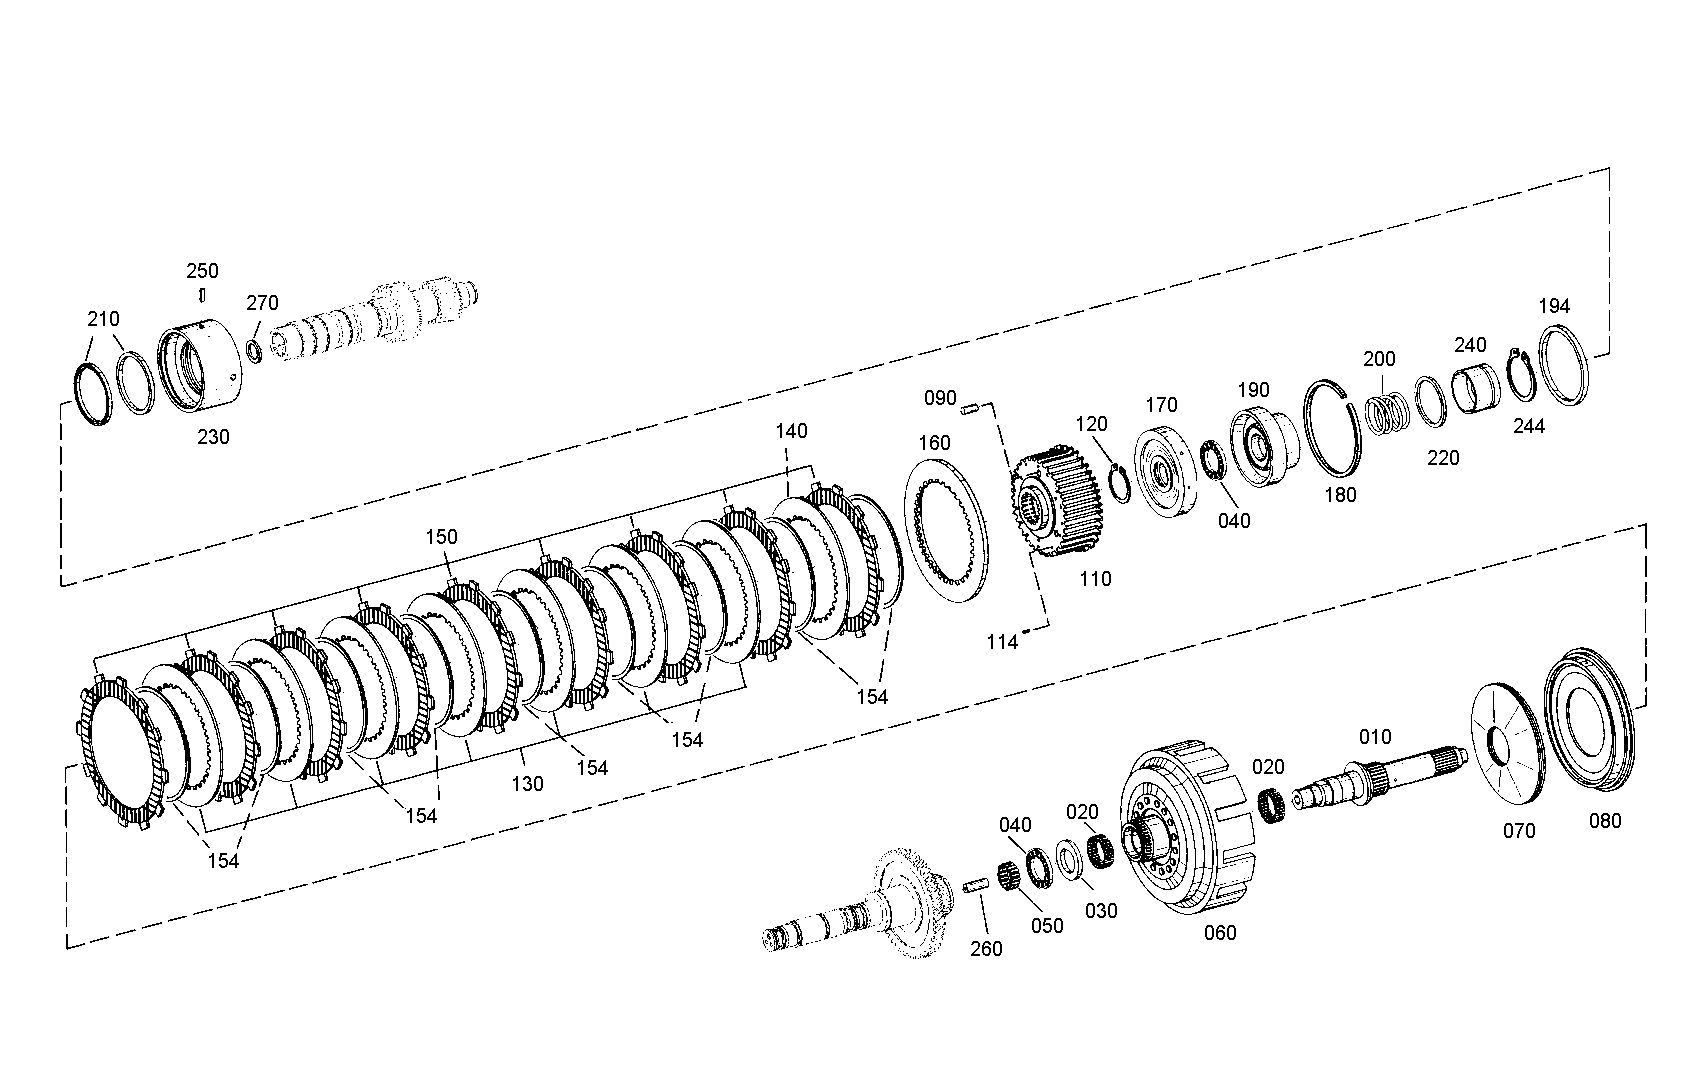 drawing for AGCO F824100100240 - END SHIM (figure 1)